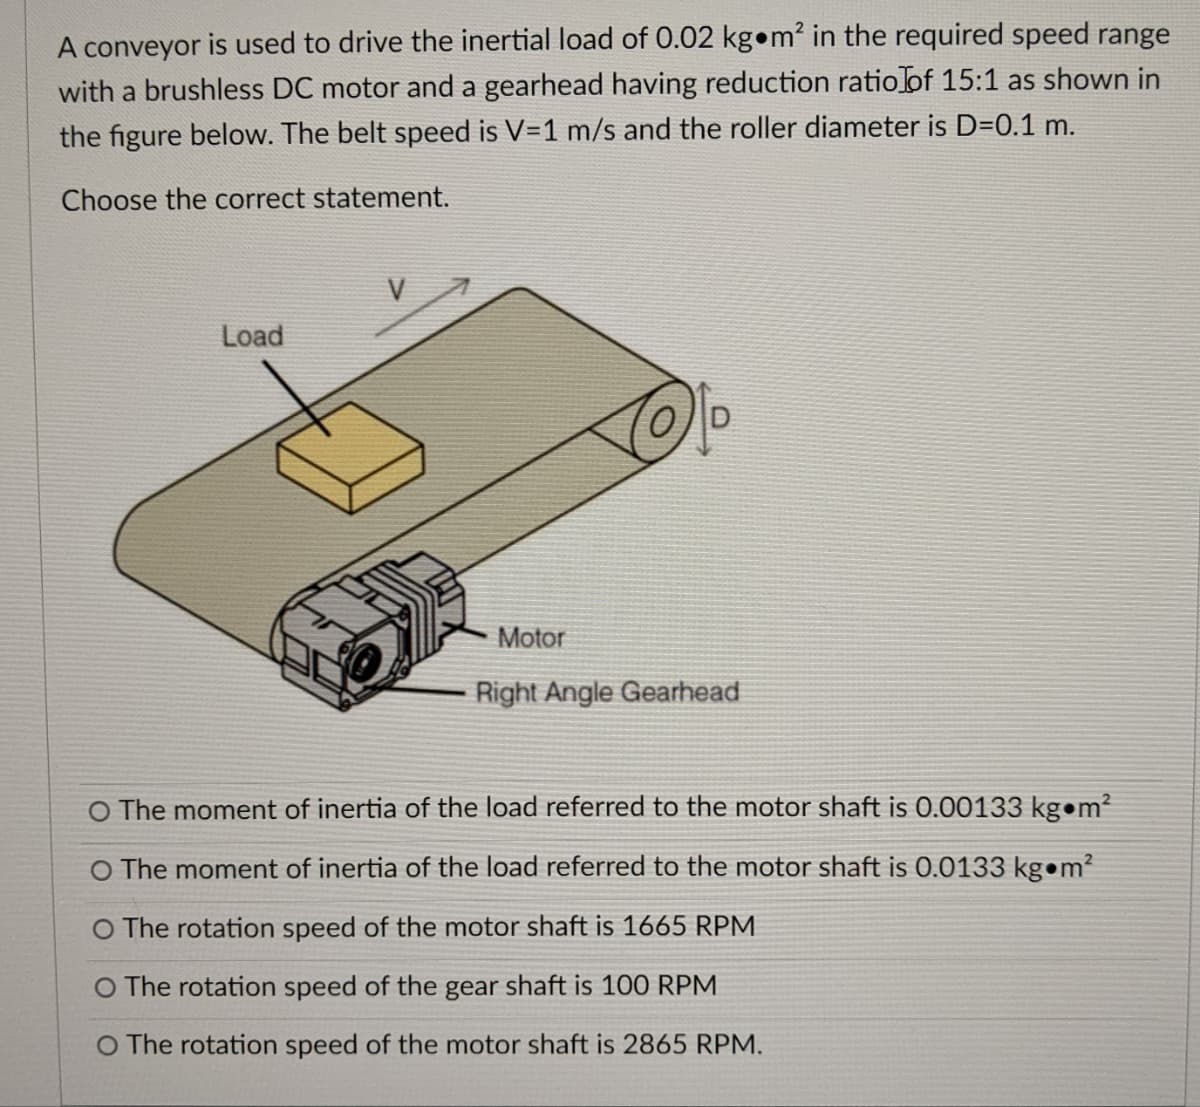 A conveyor is used to drive the inertial load of 0.02 kg m² in the required speed range
with a brushless DC motor and a gearhead having reduction ratio of 15:1 as shown in
the figure below. The belt speed is V=1 m/s and the roller diameter is D=0.1 m.
Choose the correct statement.
Load
Motor
Right Angle Gearhead
O The moment of inertia of the load referred to the motor shaft is 0.00133 kg m²
O The moment of inertia of the load referred to the motor shaft is 0.0133 kg m²
O The rotation speed of the motor shaft is 1665 RPM
O The rotation speed of the gear shaft is 100 RPM
O The rotation speed of the motor shaft is 2865 RPM.